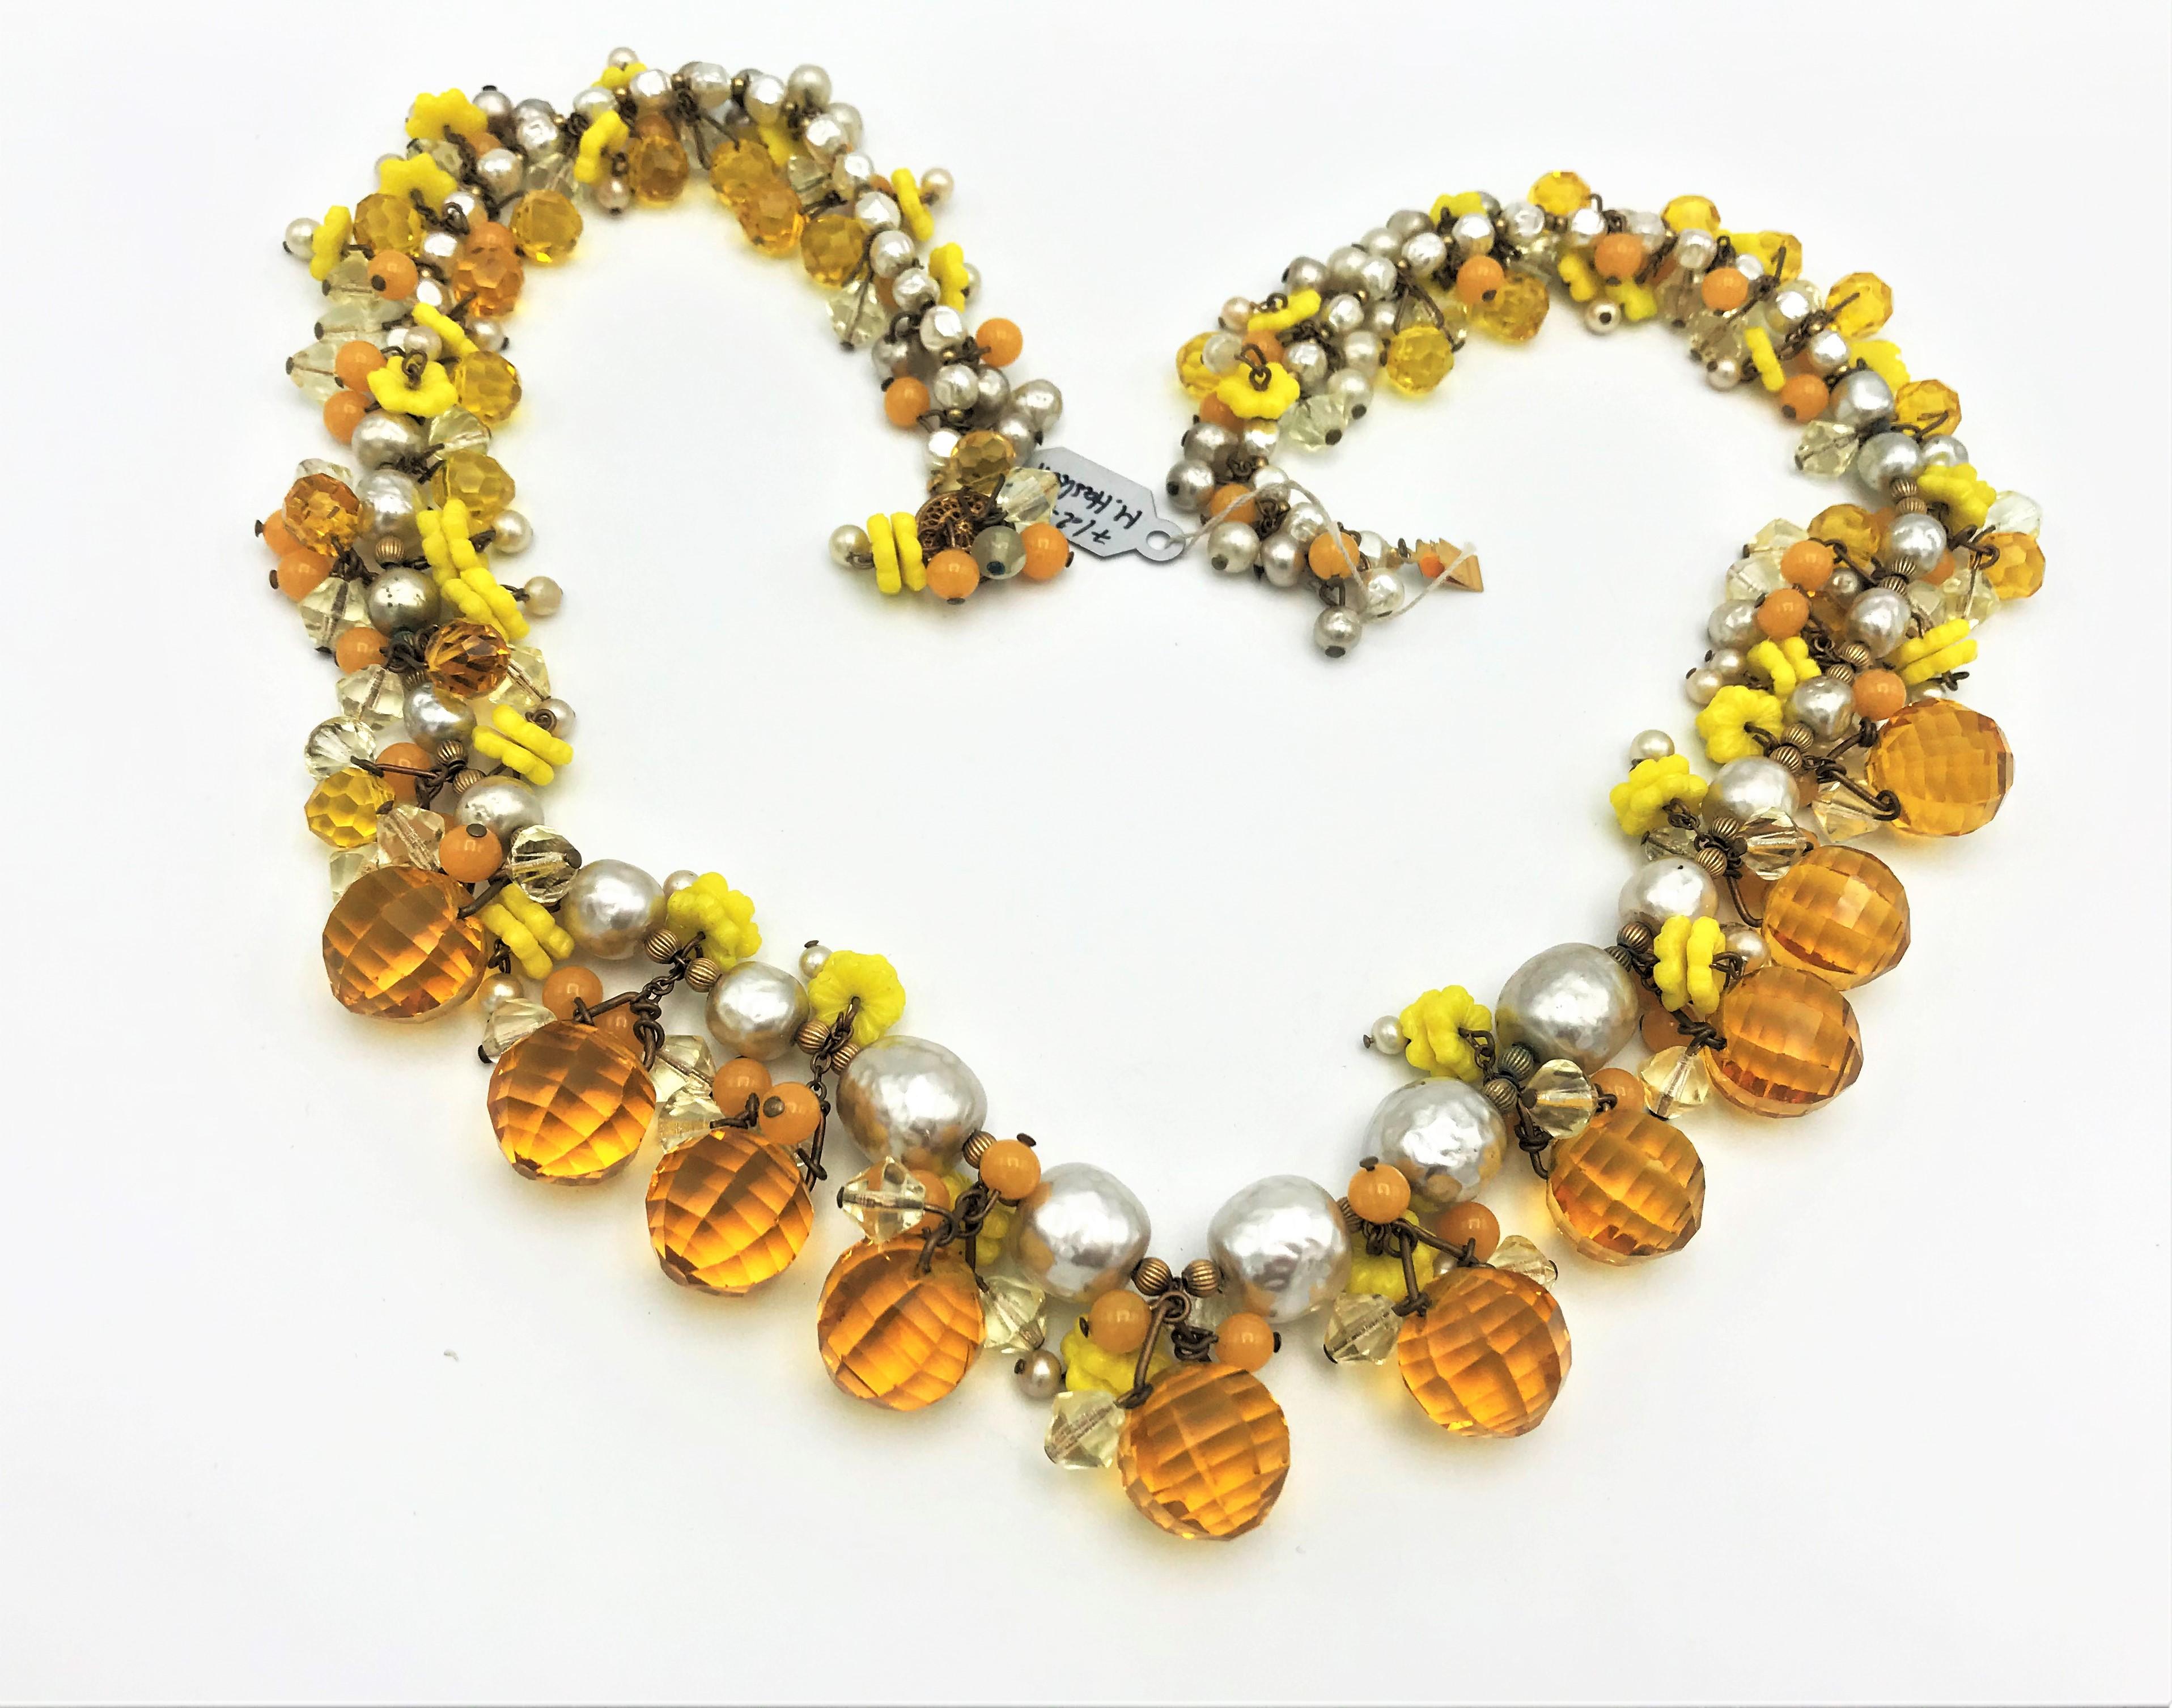 A very decorative and important necklace by Miriam Haskell, shown in 